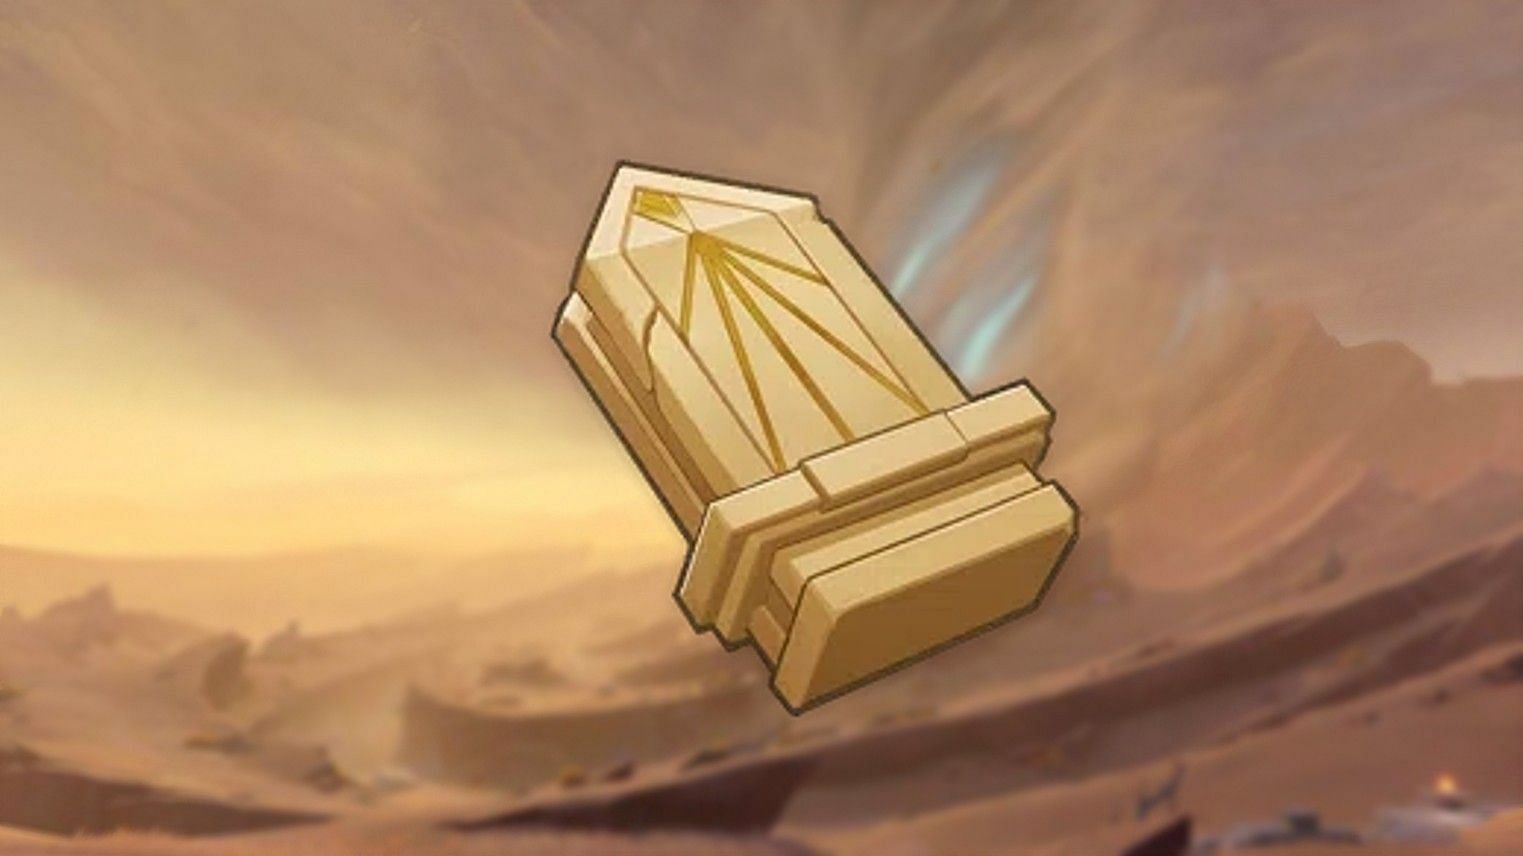 Ancient Stone Key is needed to get the Precious Chests in Tanit (Image via HoYoverse)